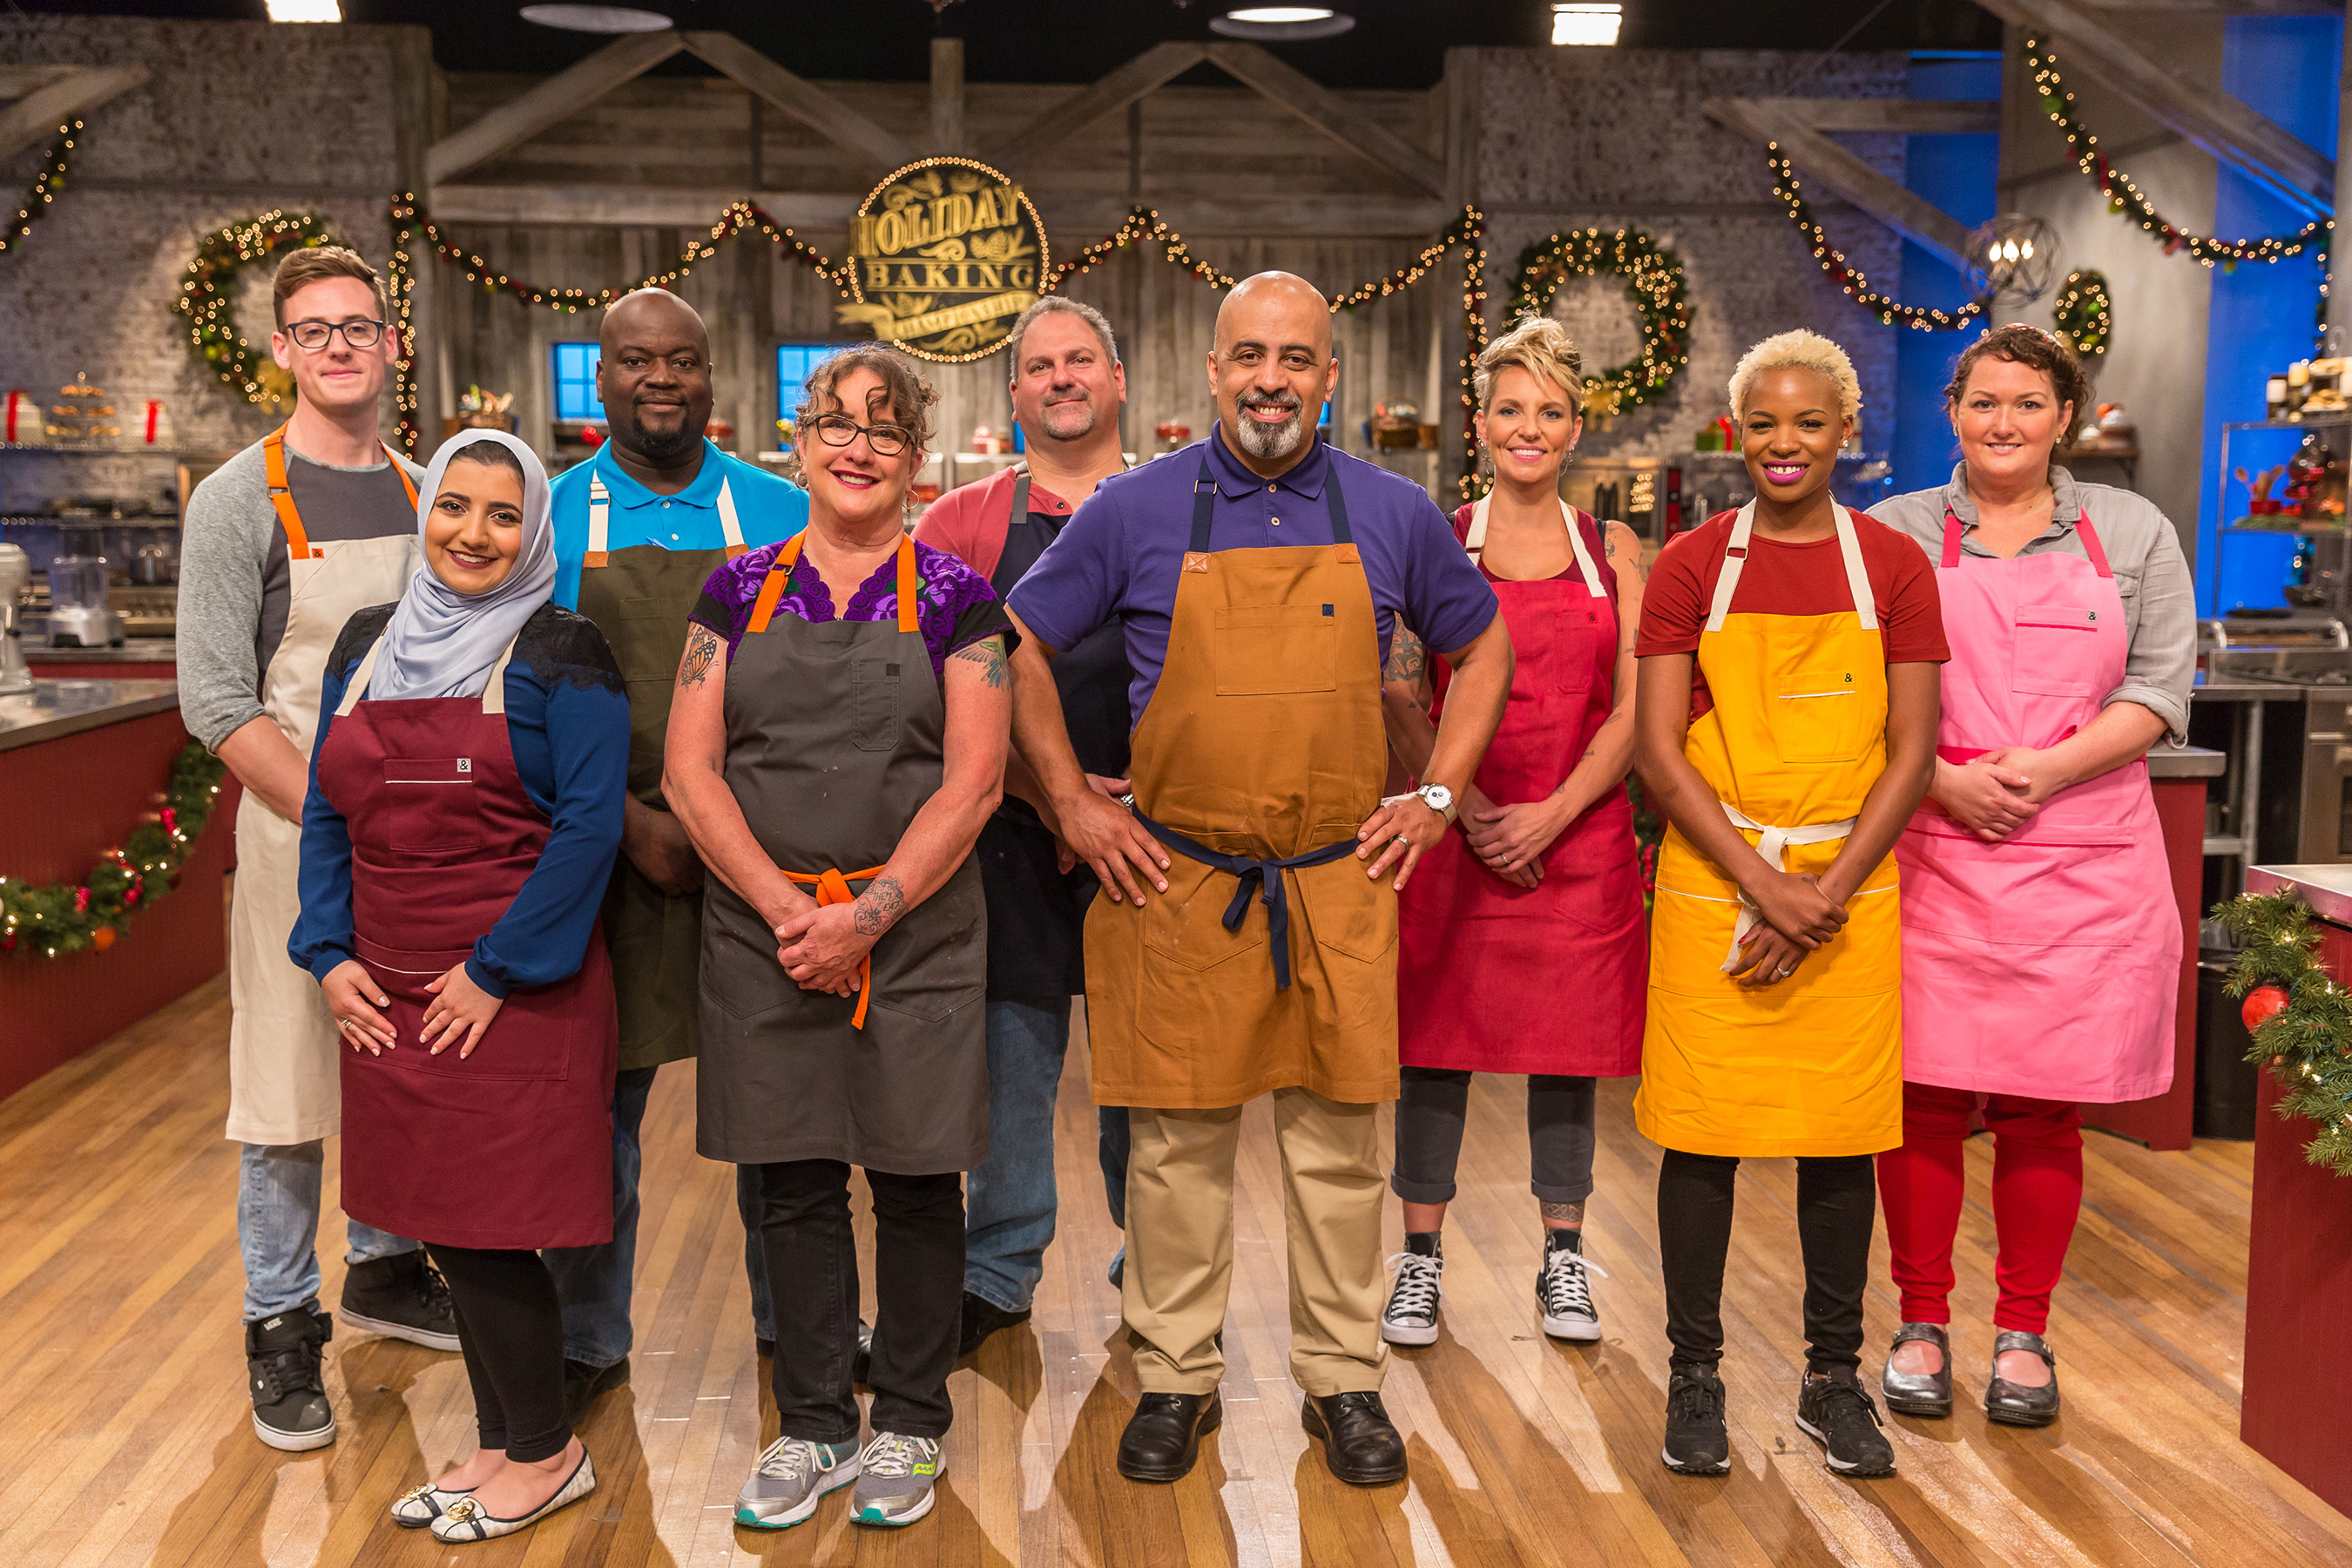 The competitors of Food Network’s Holiday Baking Championship